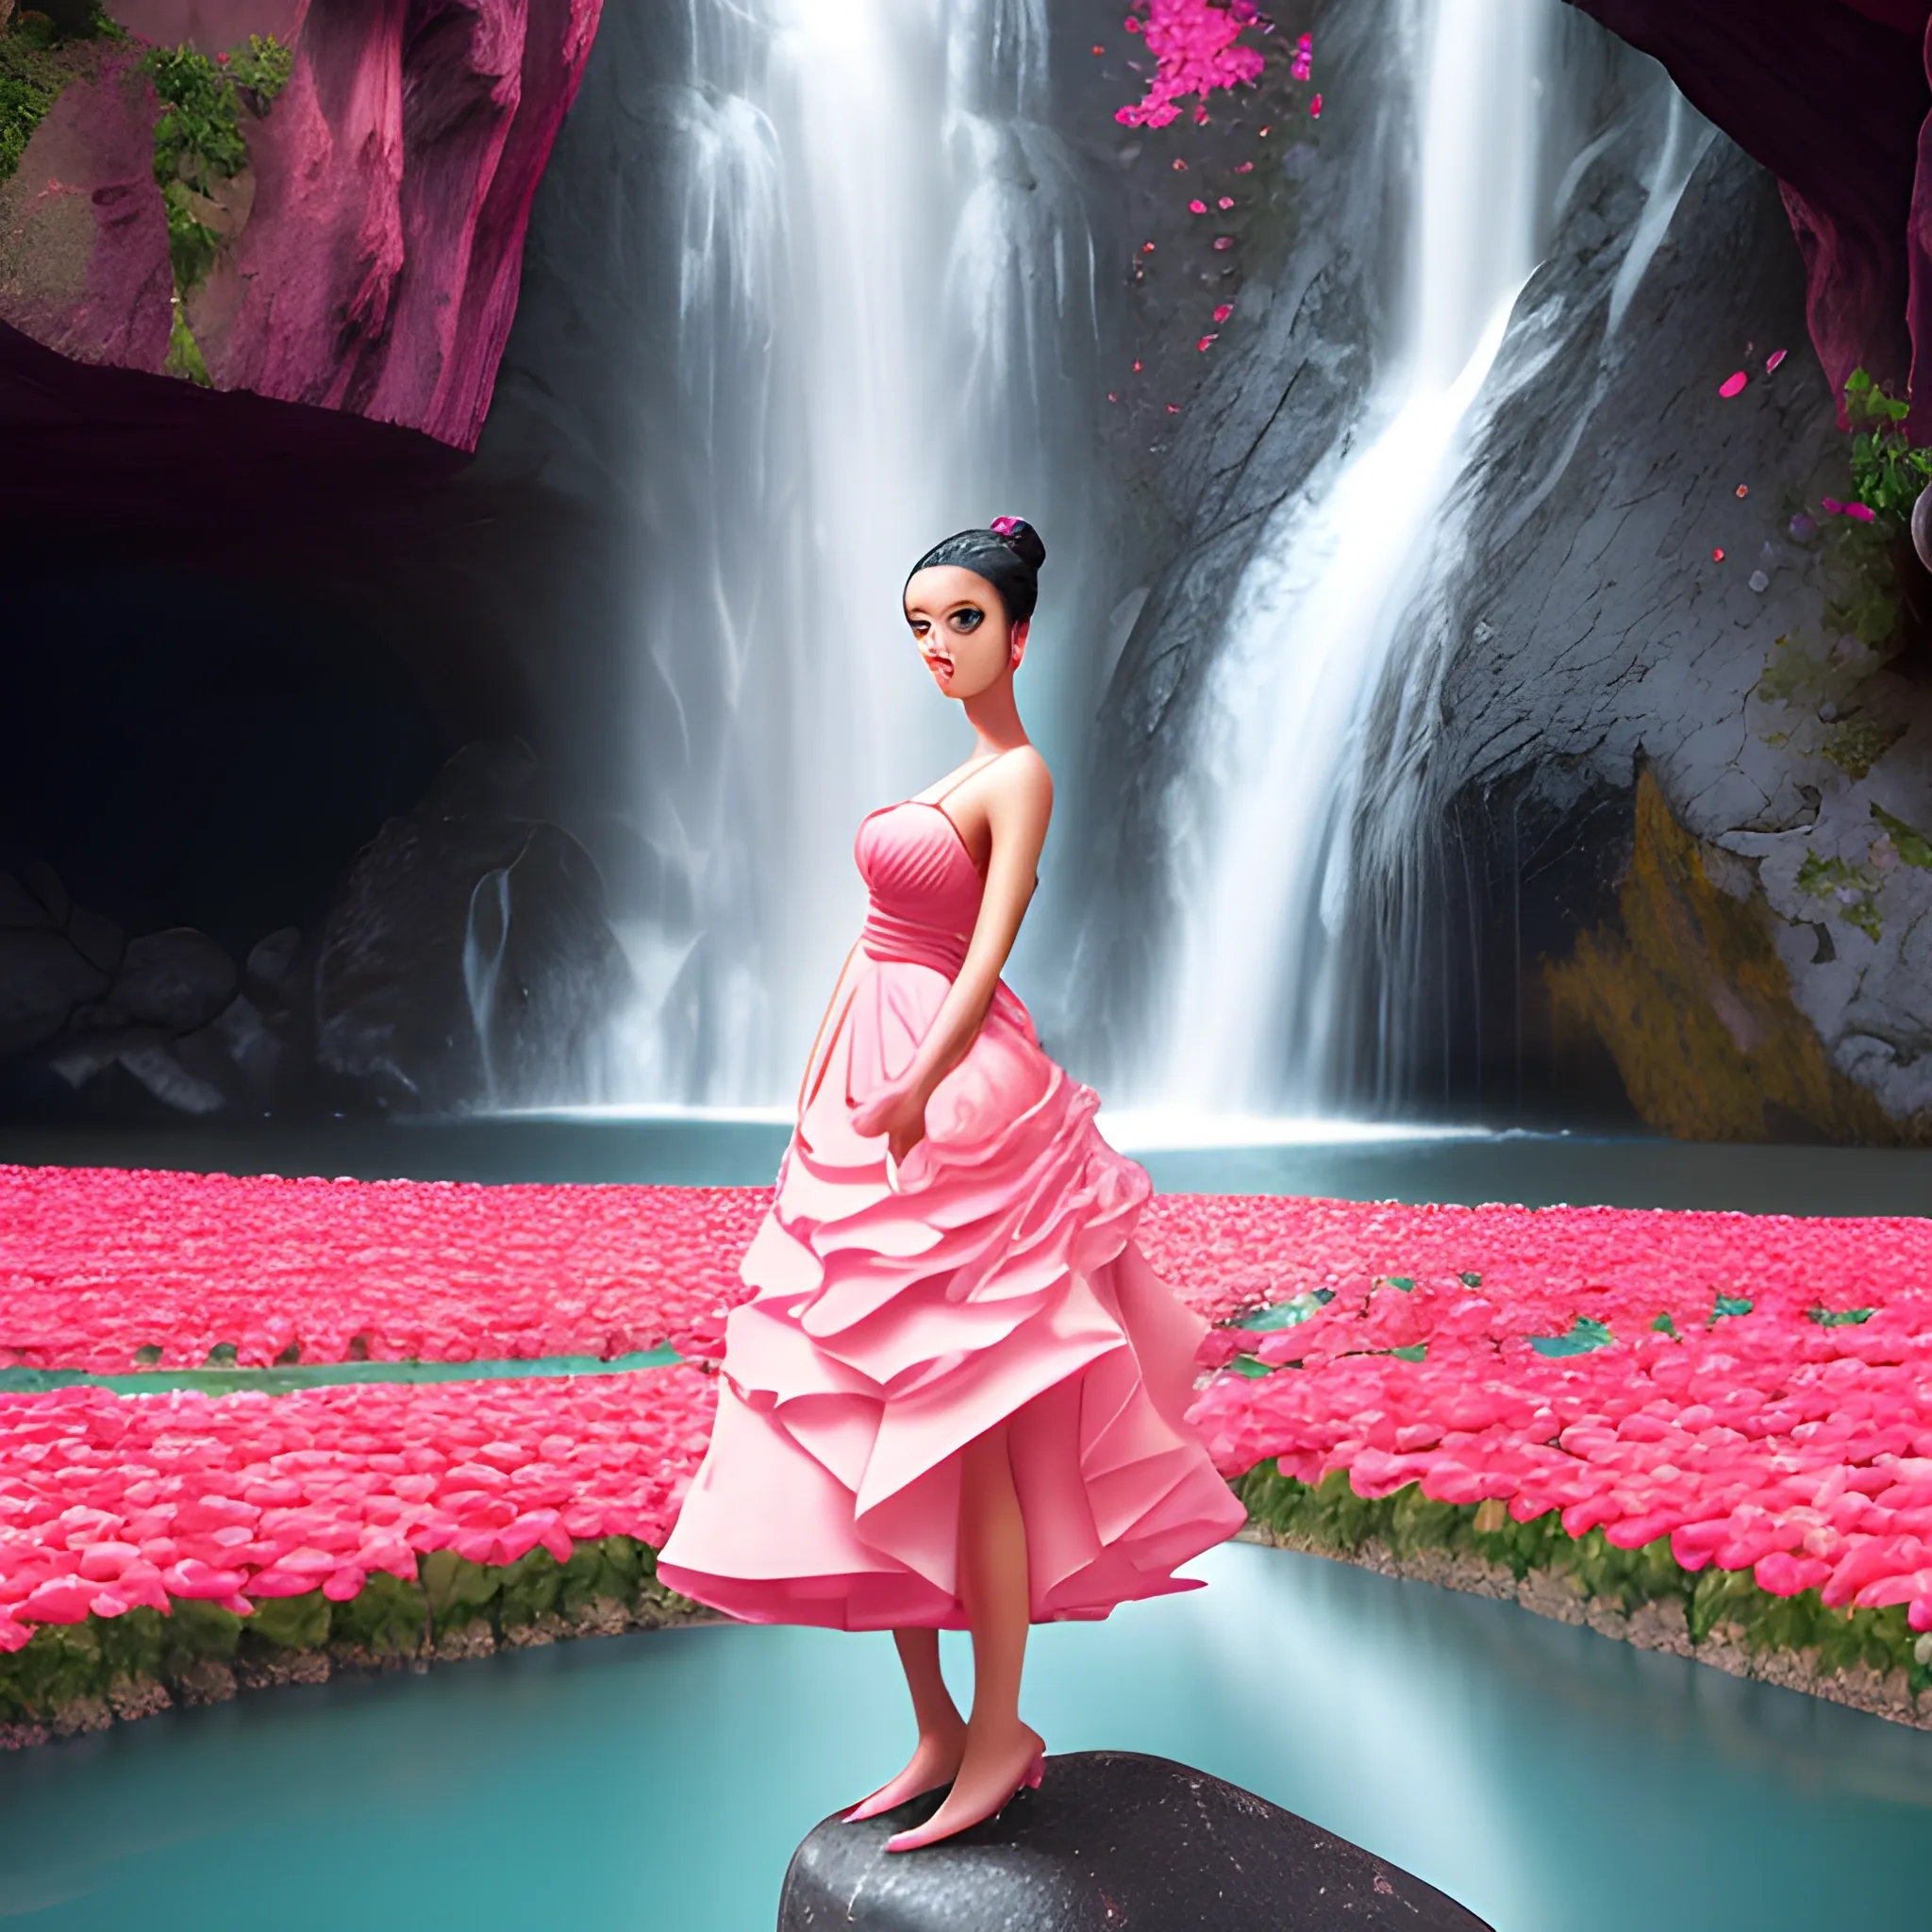 Very beautiful woman, black hair, bun hair, sexy red 
dress, standing on big stone, pink roses, light blue and pink, romanticism, high detail, 8K resolution, ultra high definition picture, waterfall background